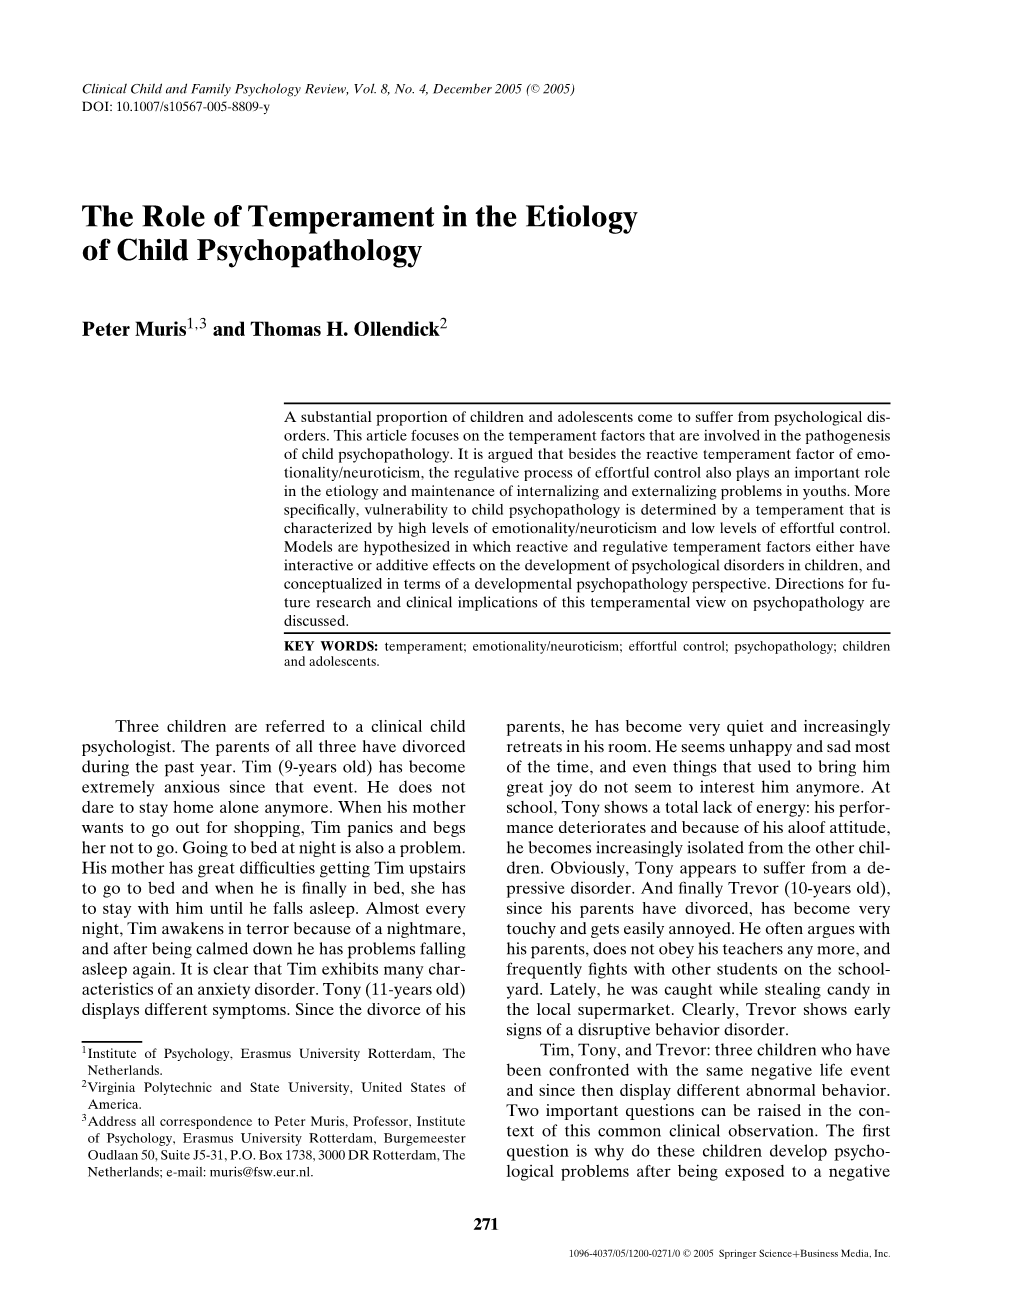 The Role of Temperament in the Etiology of Child Psychopathology